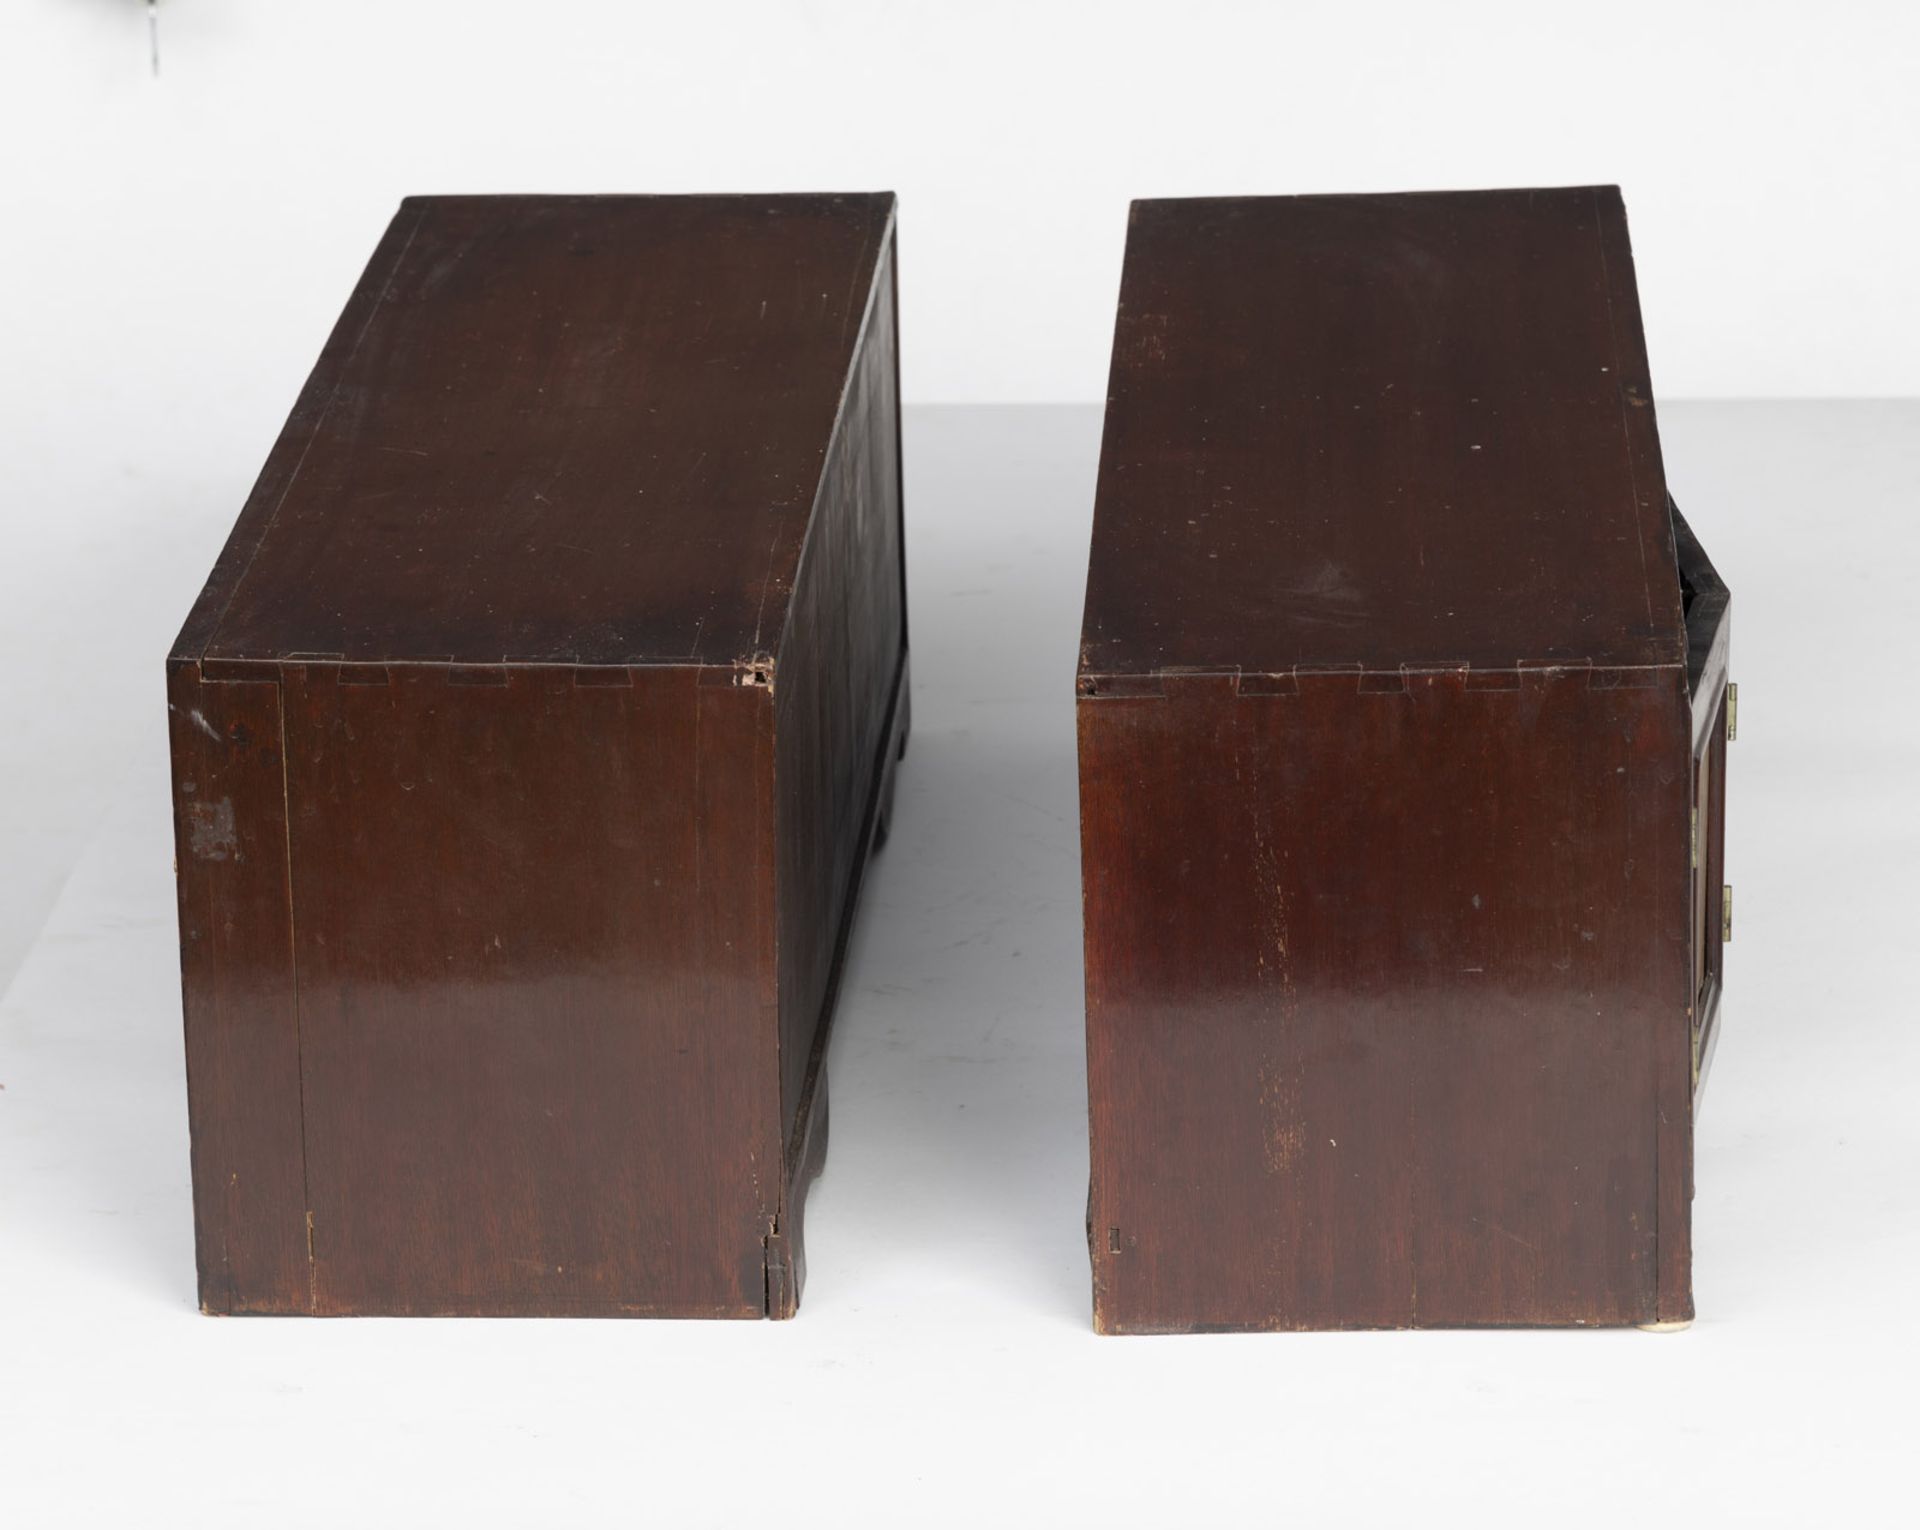 A PAIR OF FLAT WOODEN CUPBOARDS (MUNGAB), EACH WITH HINGED TWO-PARTS DOORS, INLAID WITH MARBLE PANE - Image 5 of 8